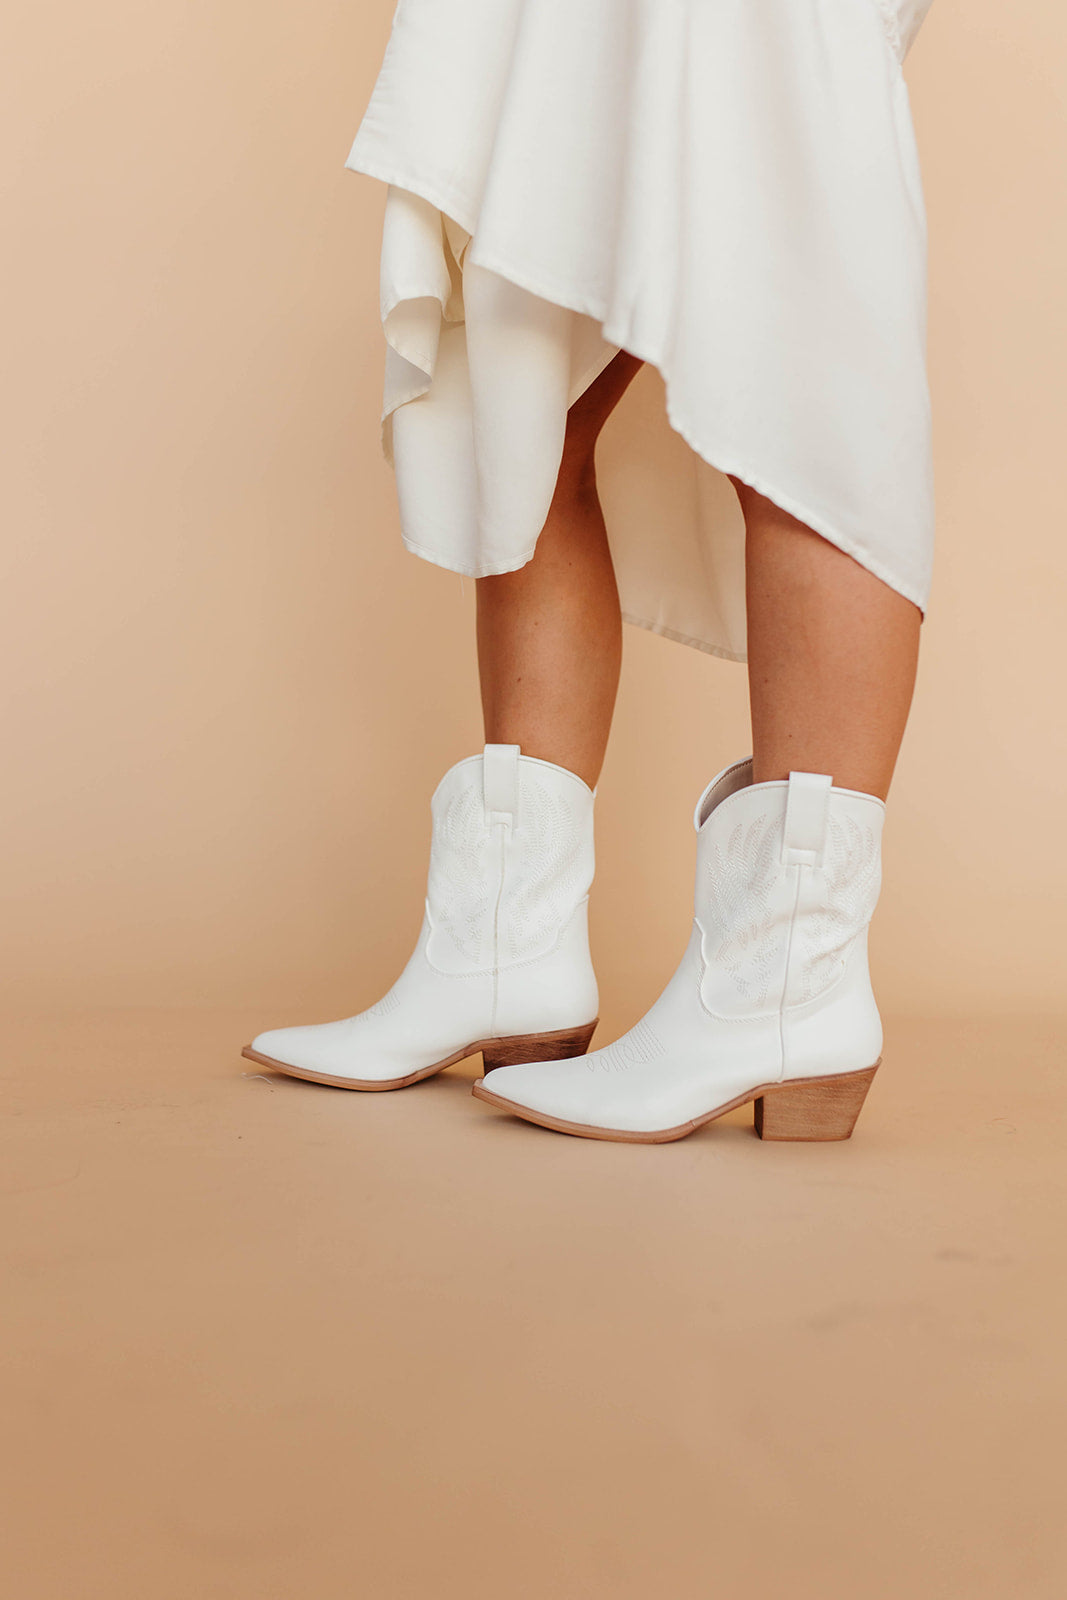 THE MIMI COWGIRL BOOTS IN WHITE